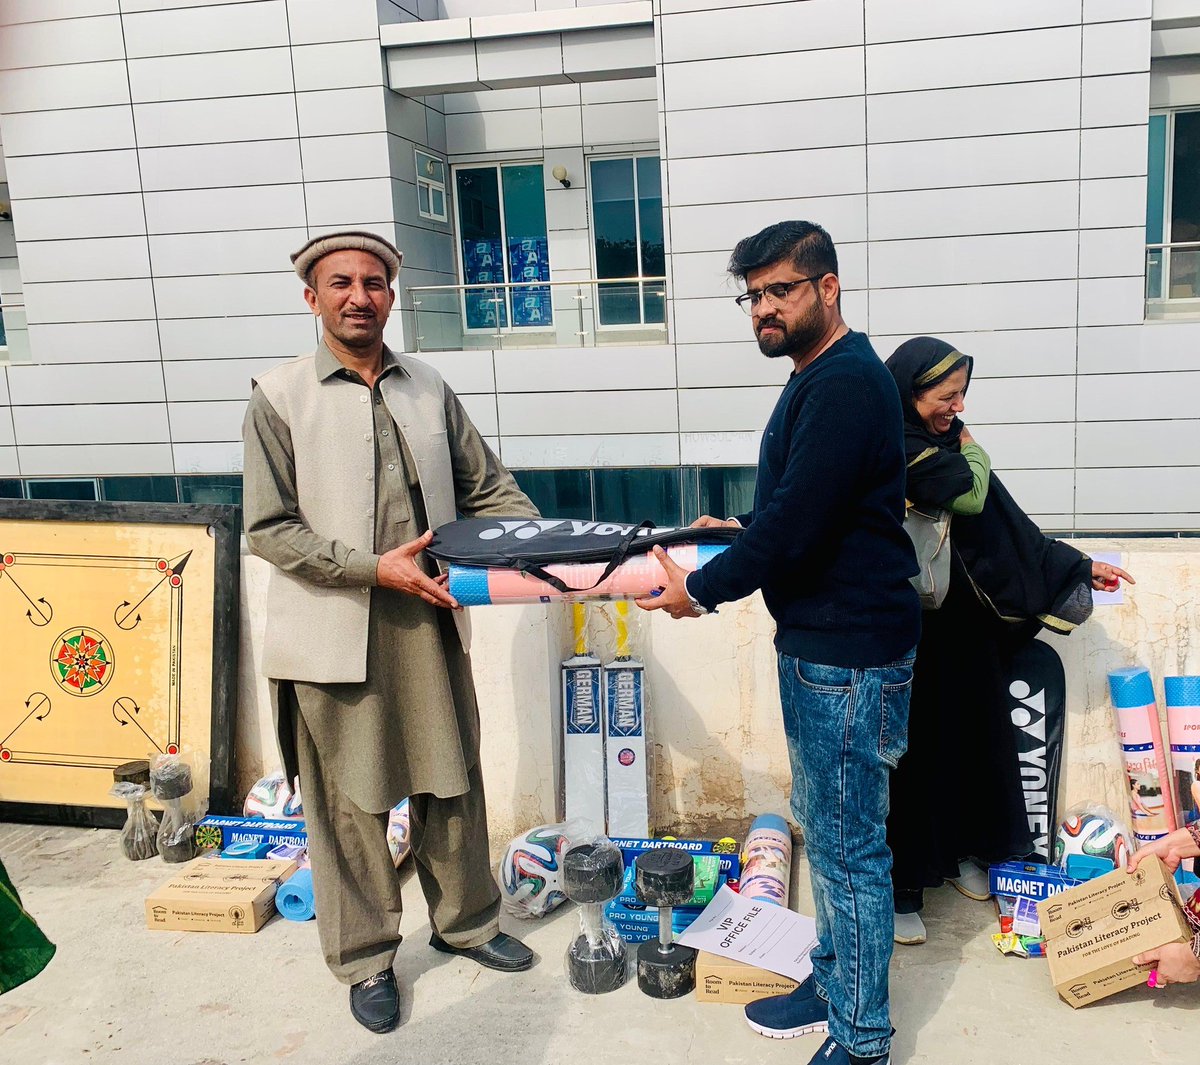 Exciting developments in Afghan refugee schools! Sports items  distributed through SSARC-GIZ's S4D Program will foster a healthier  lifestyle and impart crucial life skills. Thanks to all involved in promoting education and well-being. #EducationForAll  #SportsForDevelopment 📚⚽️